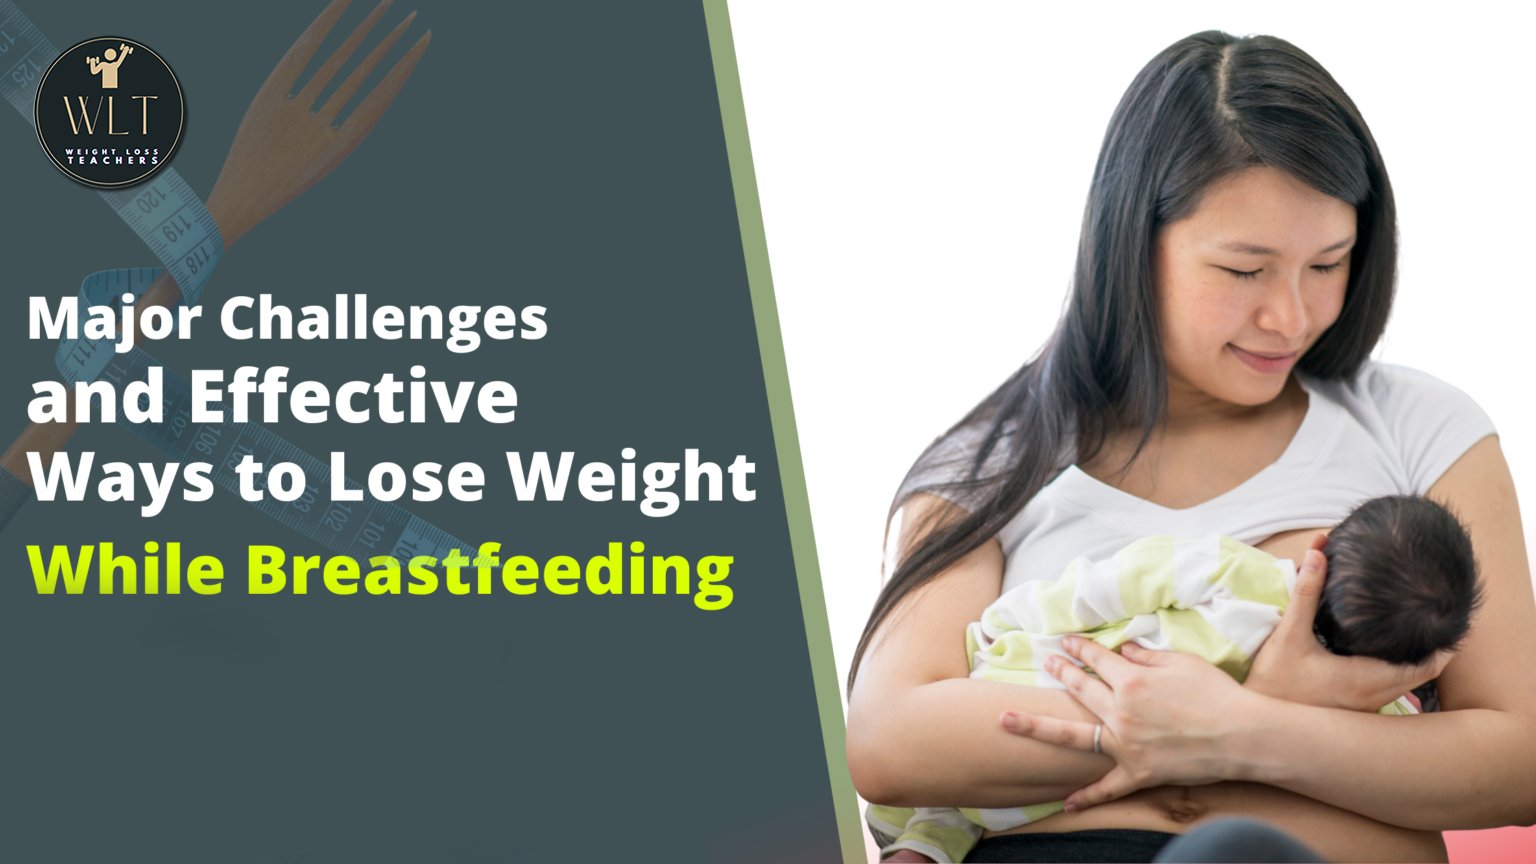 Major Challenges and Effective Ways to Lose Weight While Breastfeeding